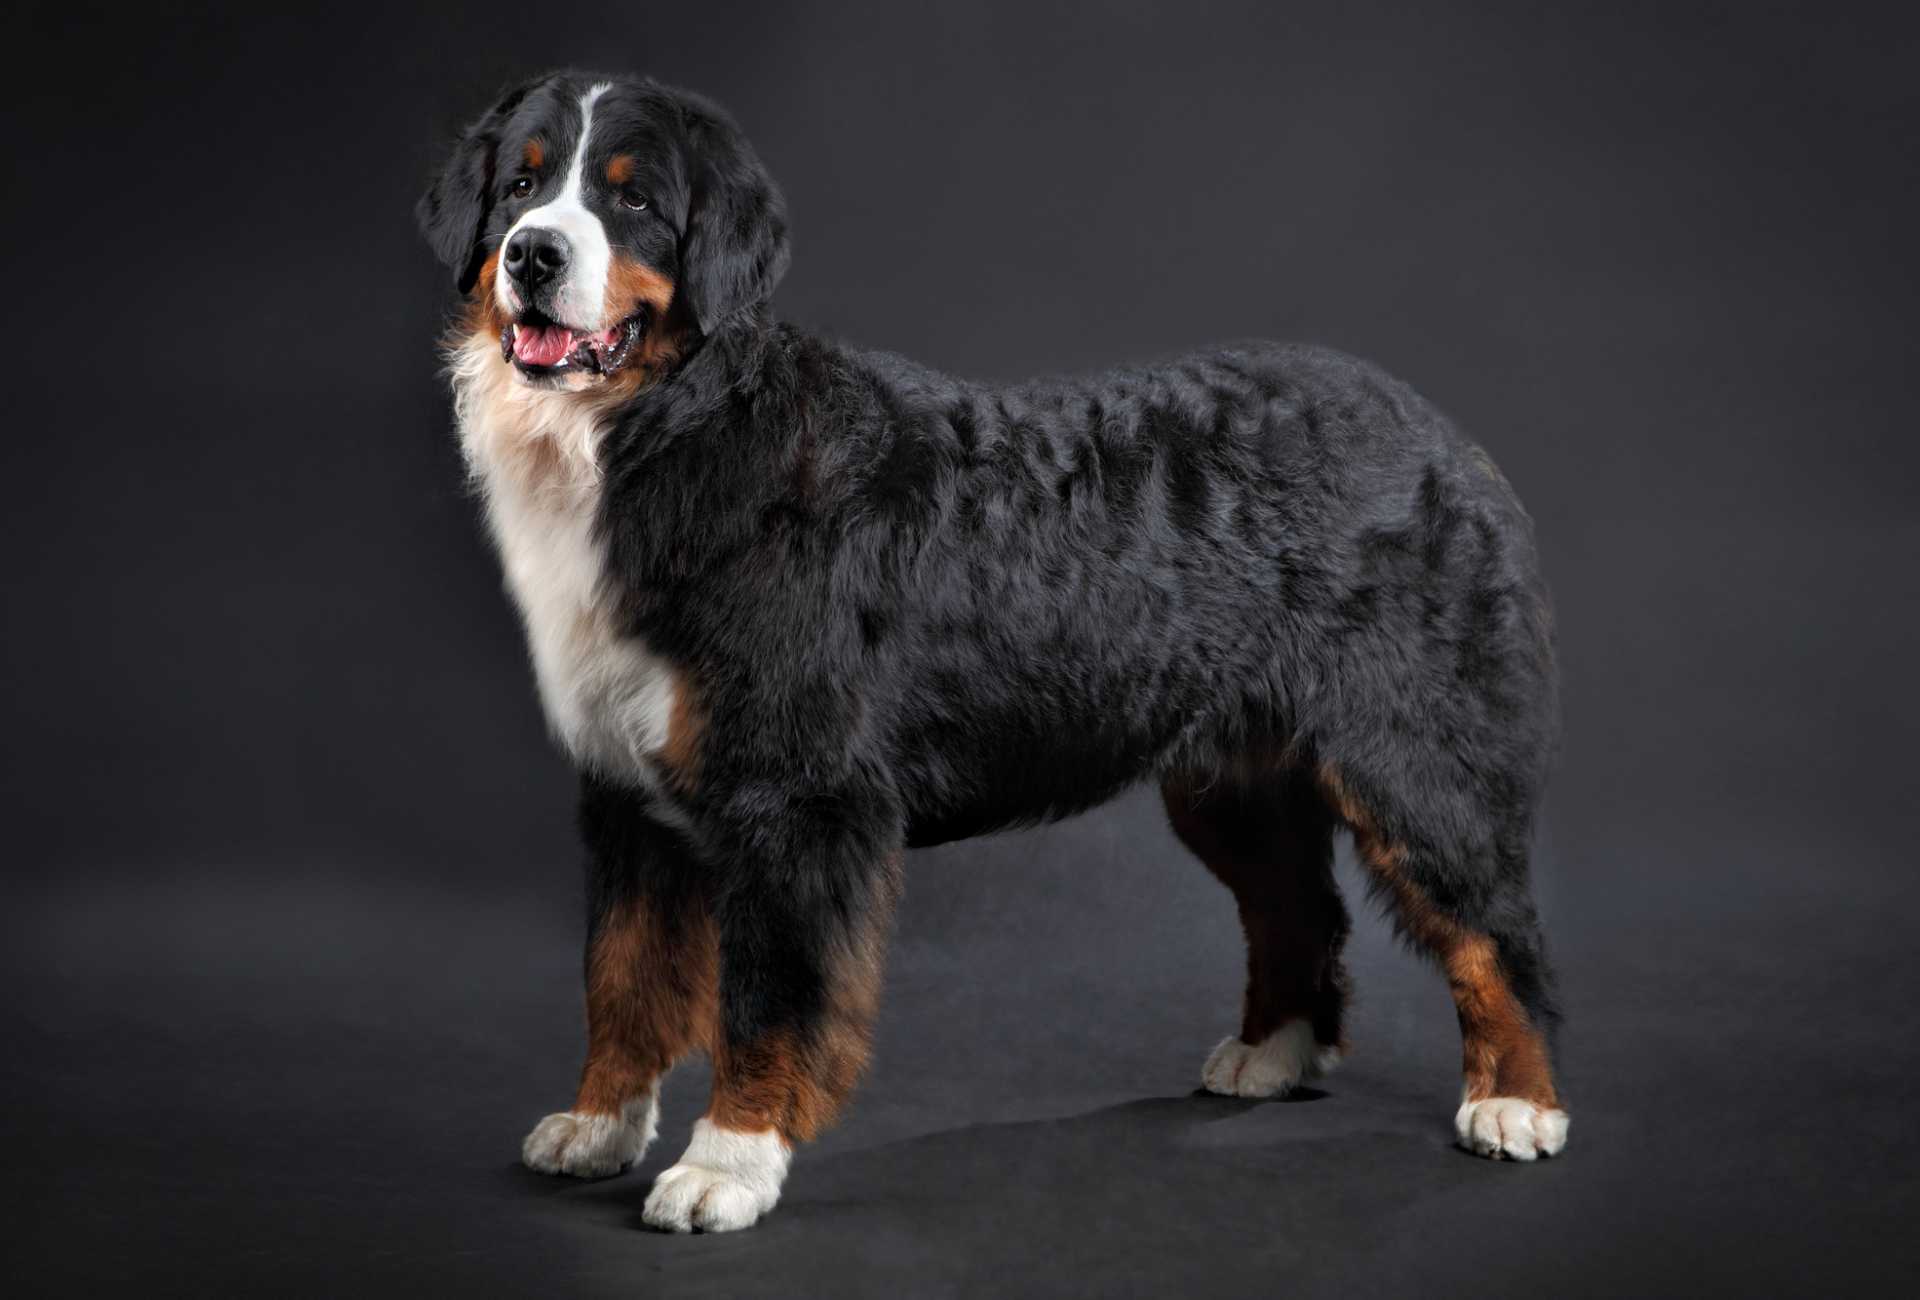 Full body shot of a Bernese Mountain Dog in front of a black background.